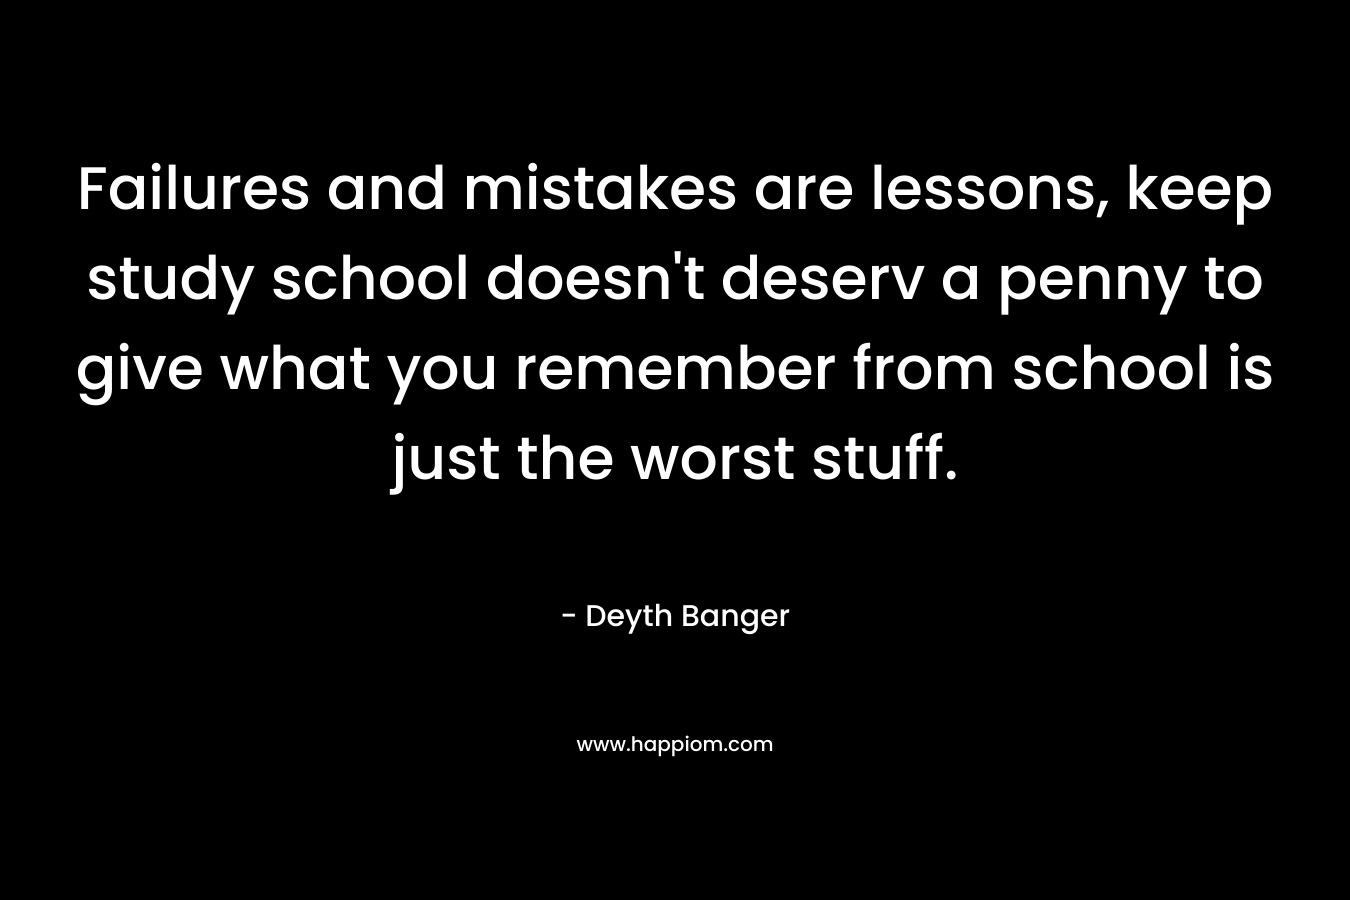 Failures and mistakes are lessons, keep study school doesn’t deserv a penny to give what you remember from school is just the worst stuff. – Deyth Banger